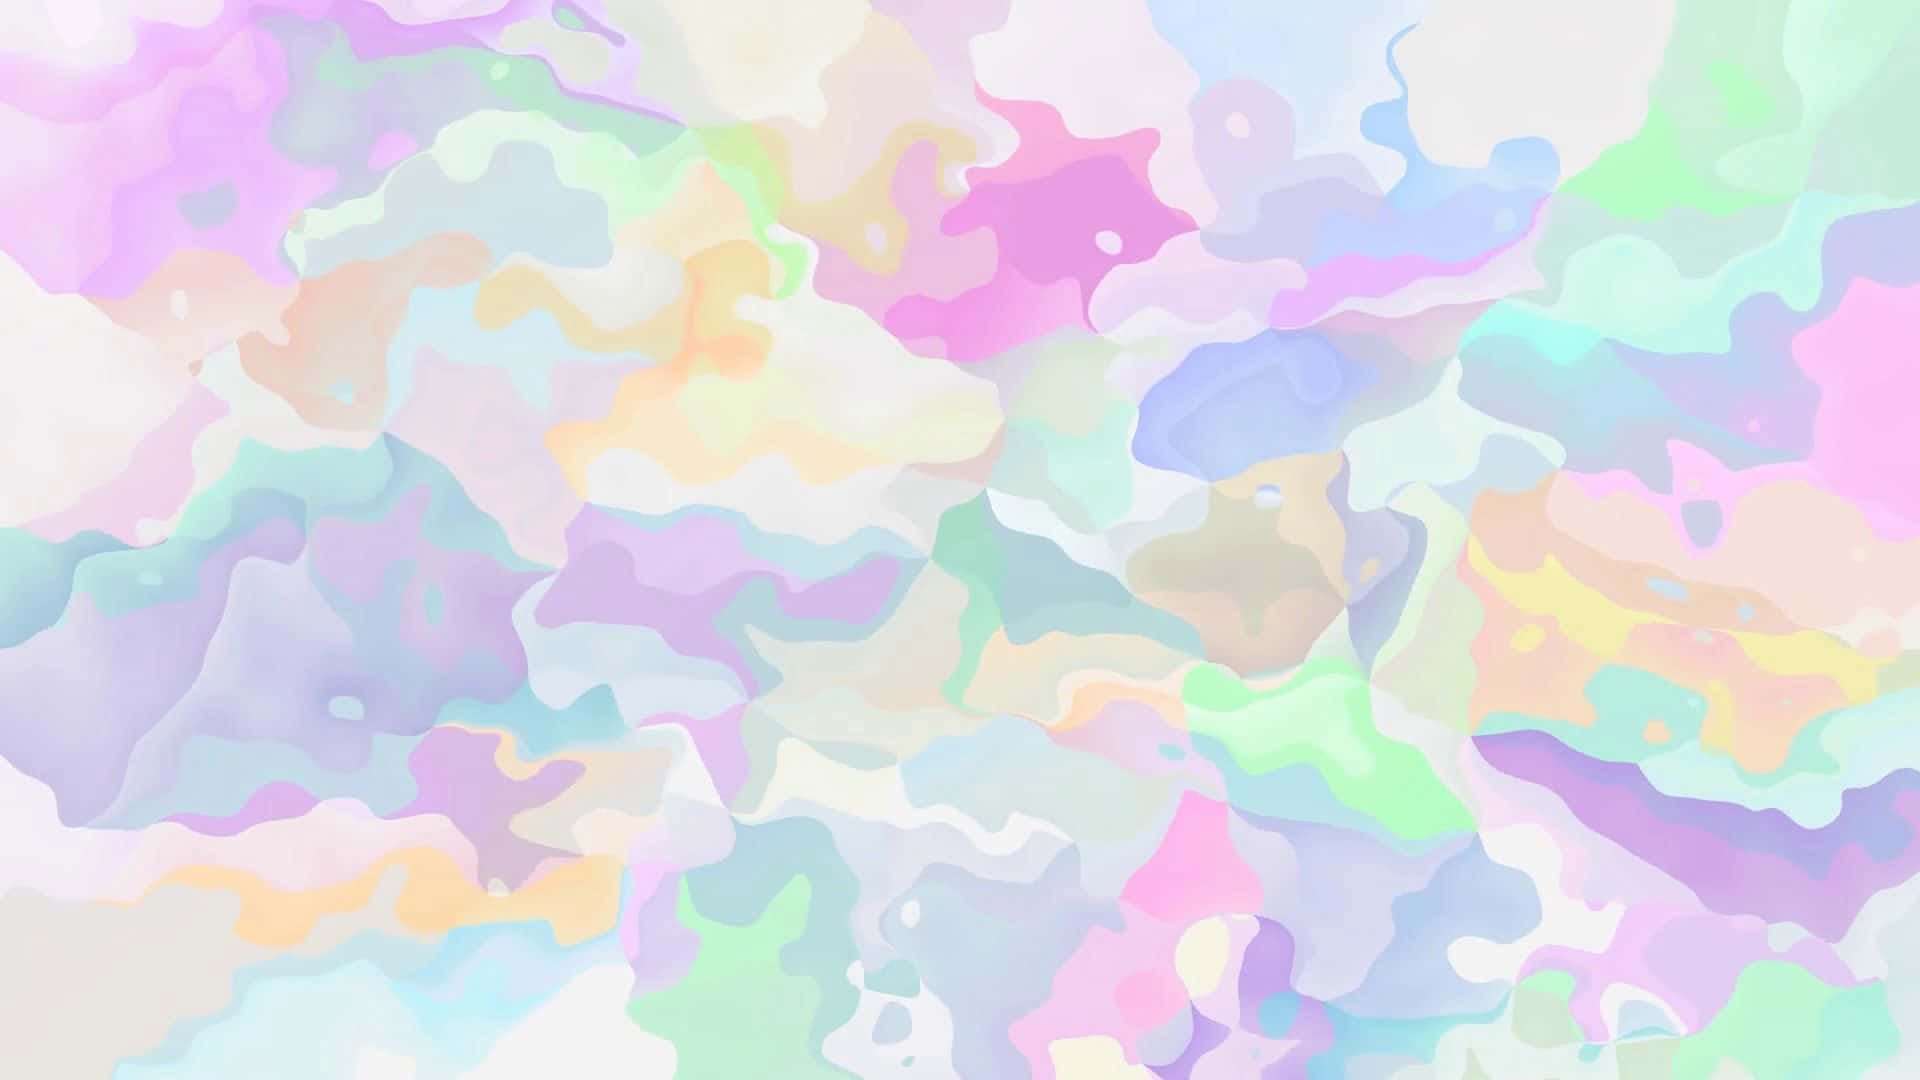 A Pastel Cute Background with Colorful Patterns